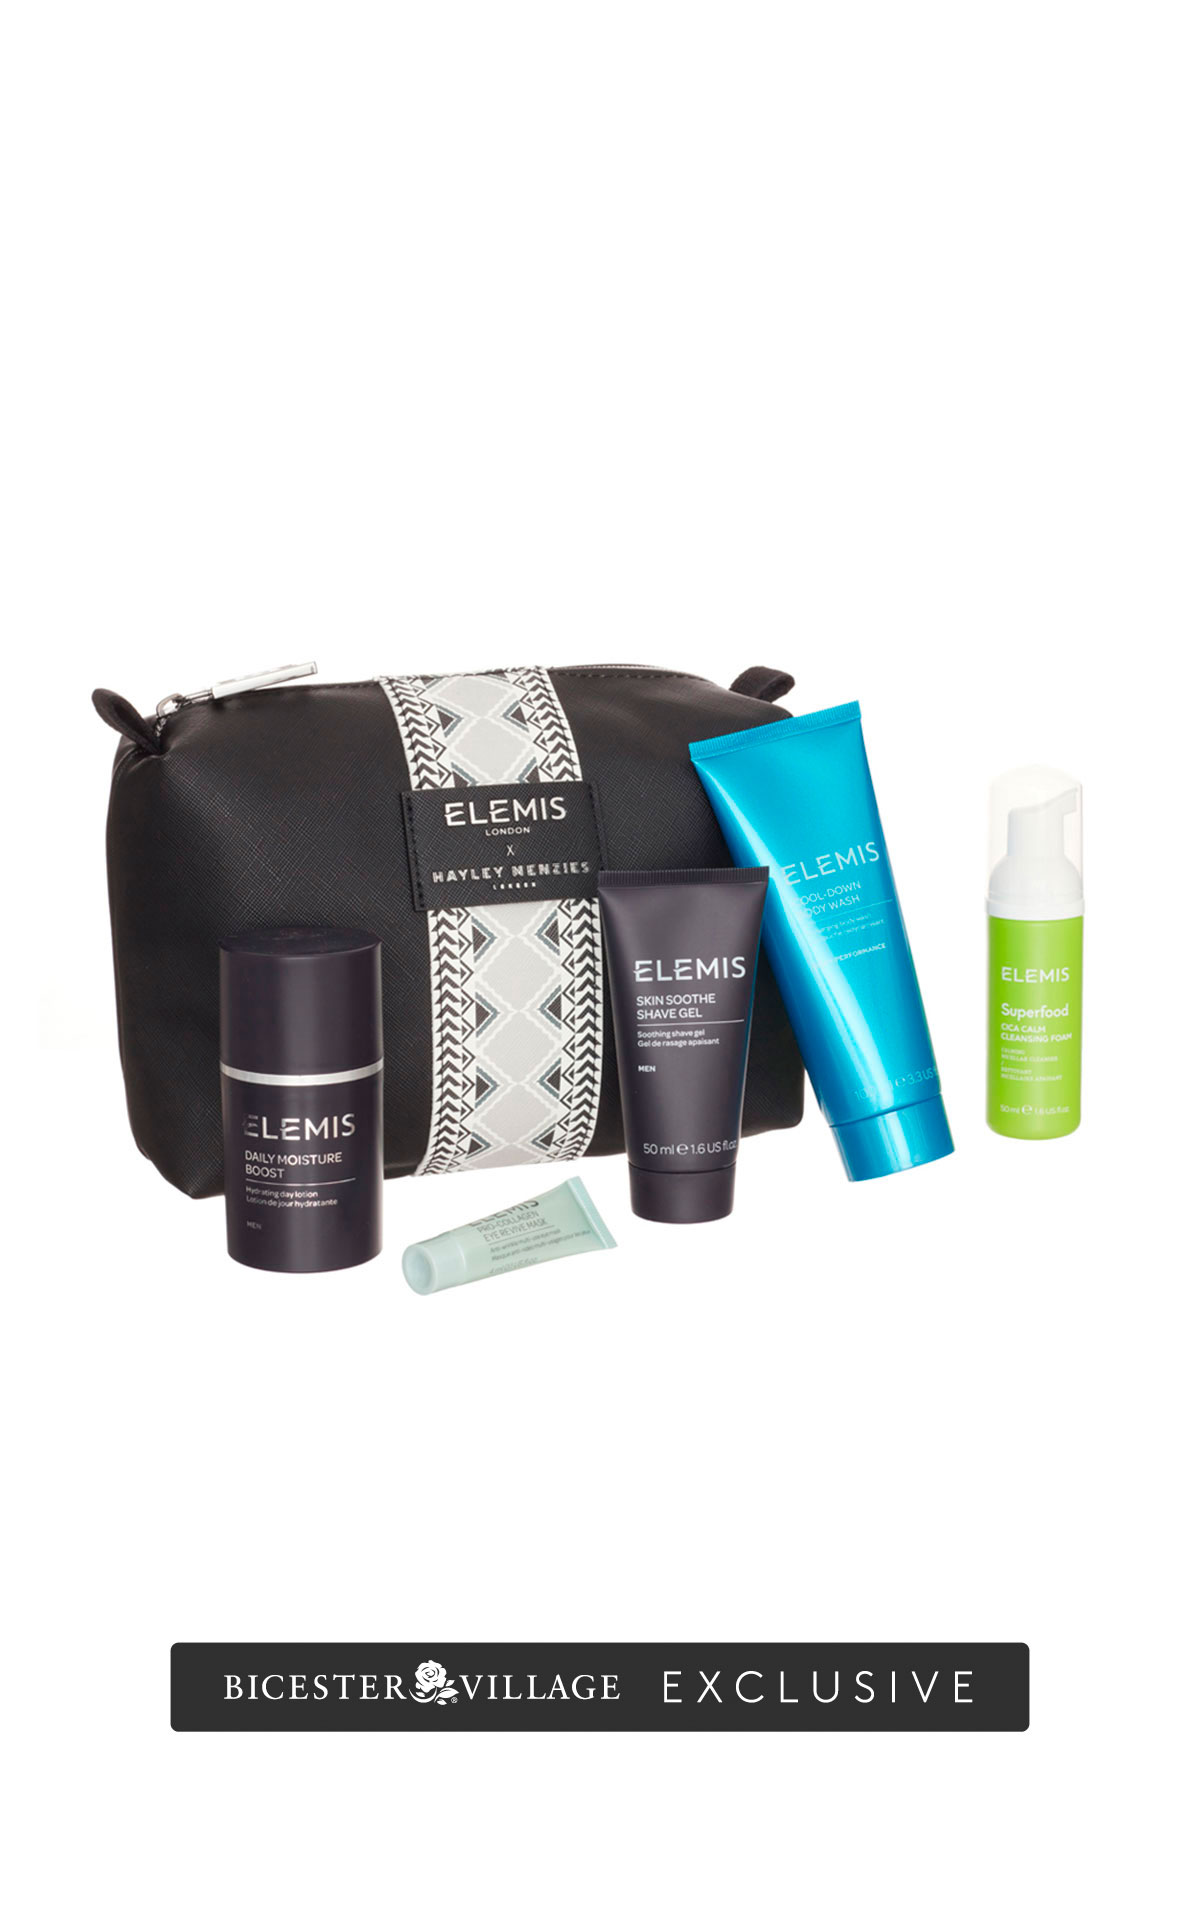 ELEMIS Hayley Menzies London grooming collection from Bicester Village